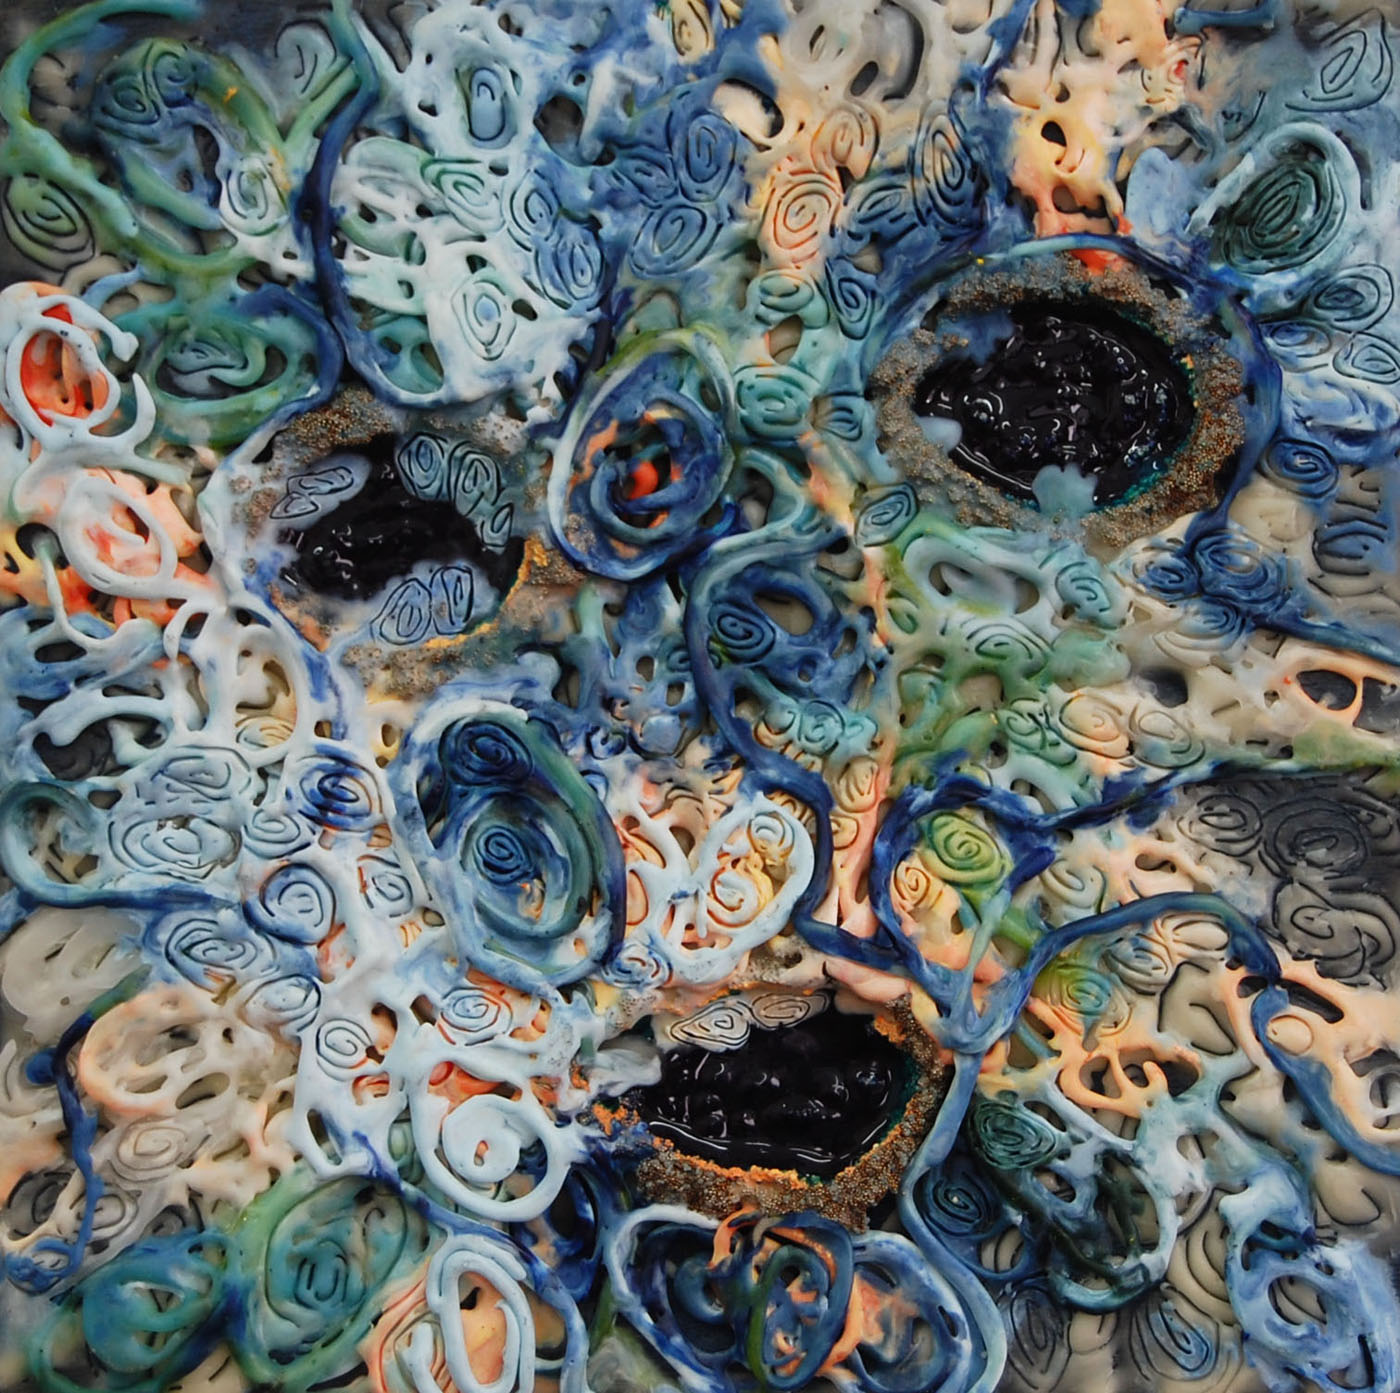 Sea Cells I, 2011, encaustic, glass beads, and urethane on panel